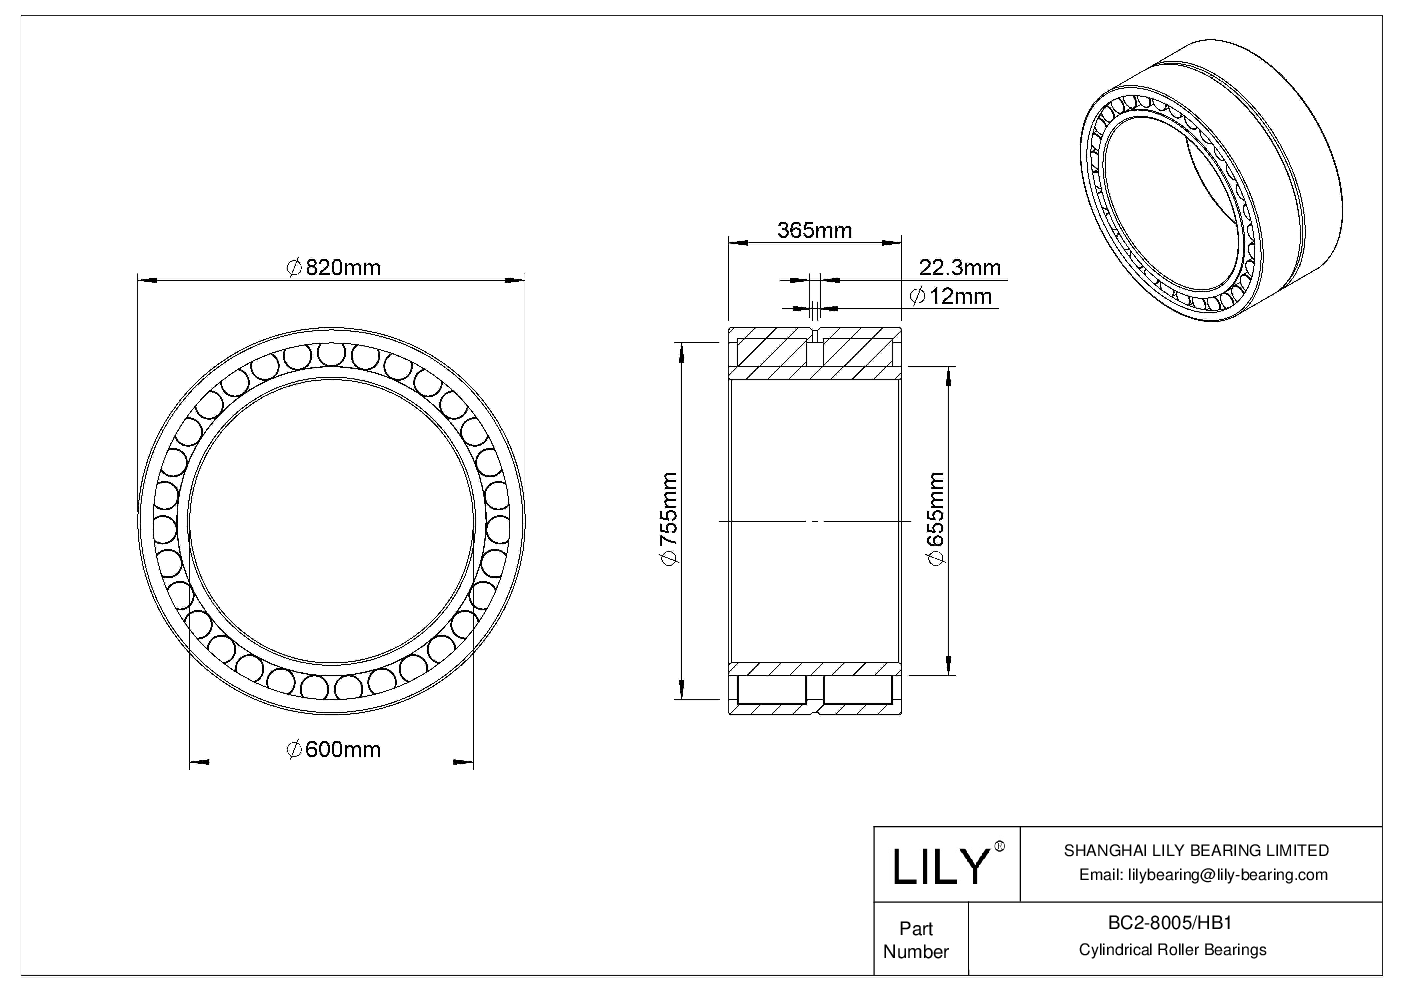 BC2-8005/HB1 Double Row Cylindrical Roller Bearings cad drawing